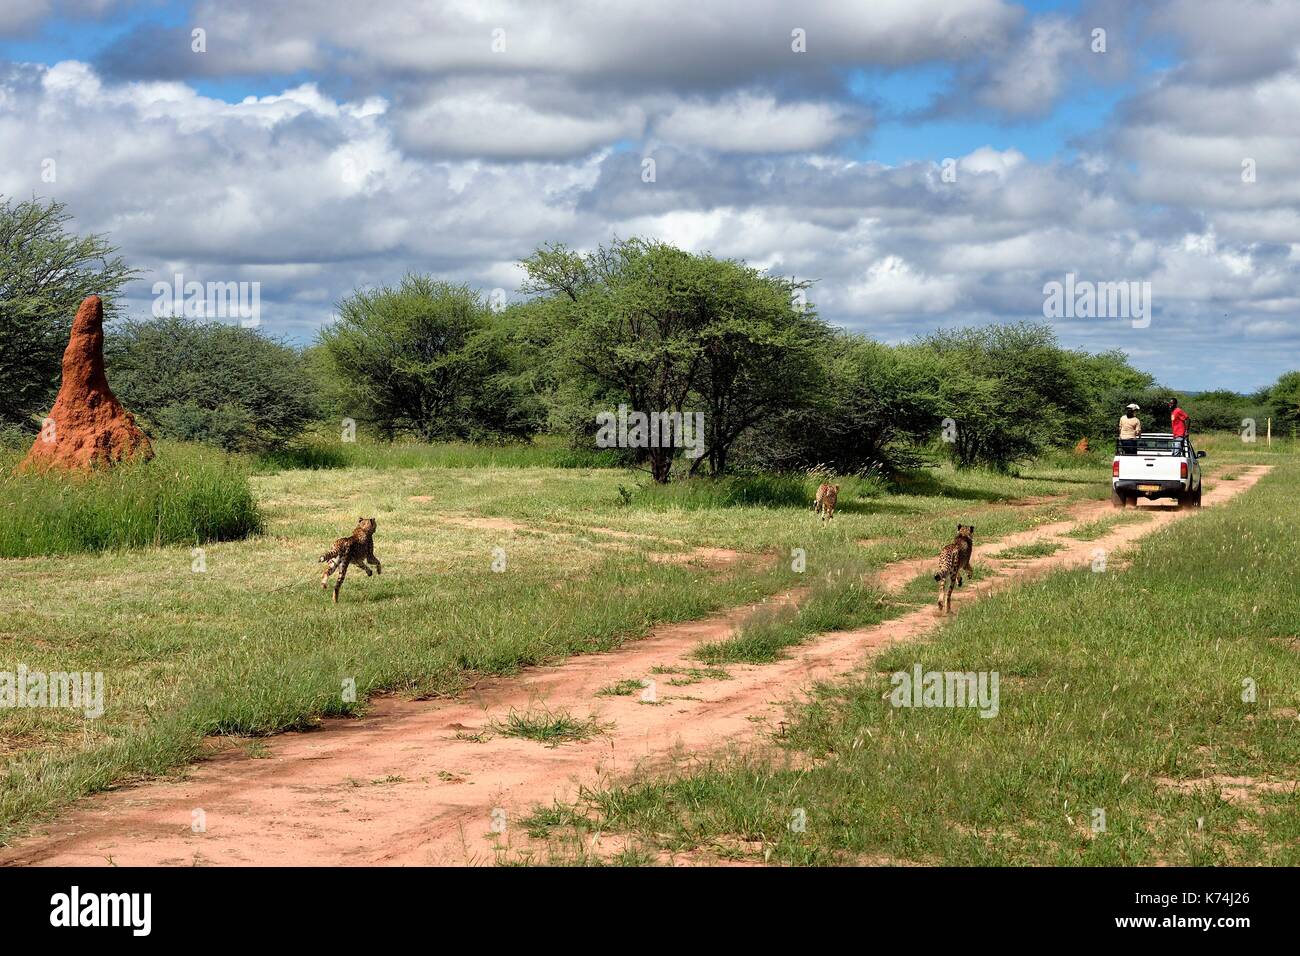 Namibia, Otjiwarongo, Cheetah Conservation Fund, research and education centre, cheetahs (Acinonyx jubatus), feeding from a moving pick-up, the purpose of the exercise is to keep them in shape Stock Photo